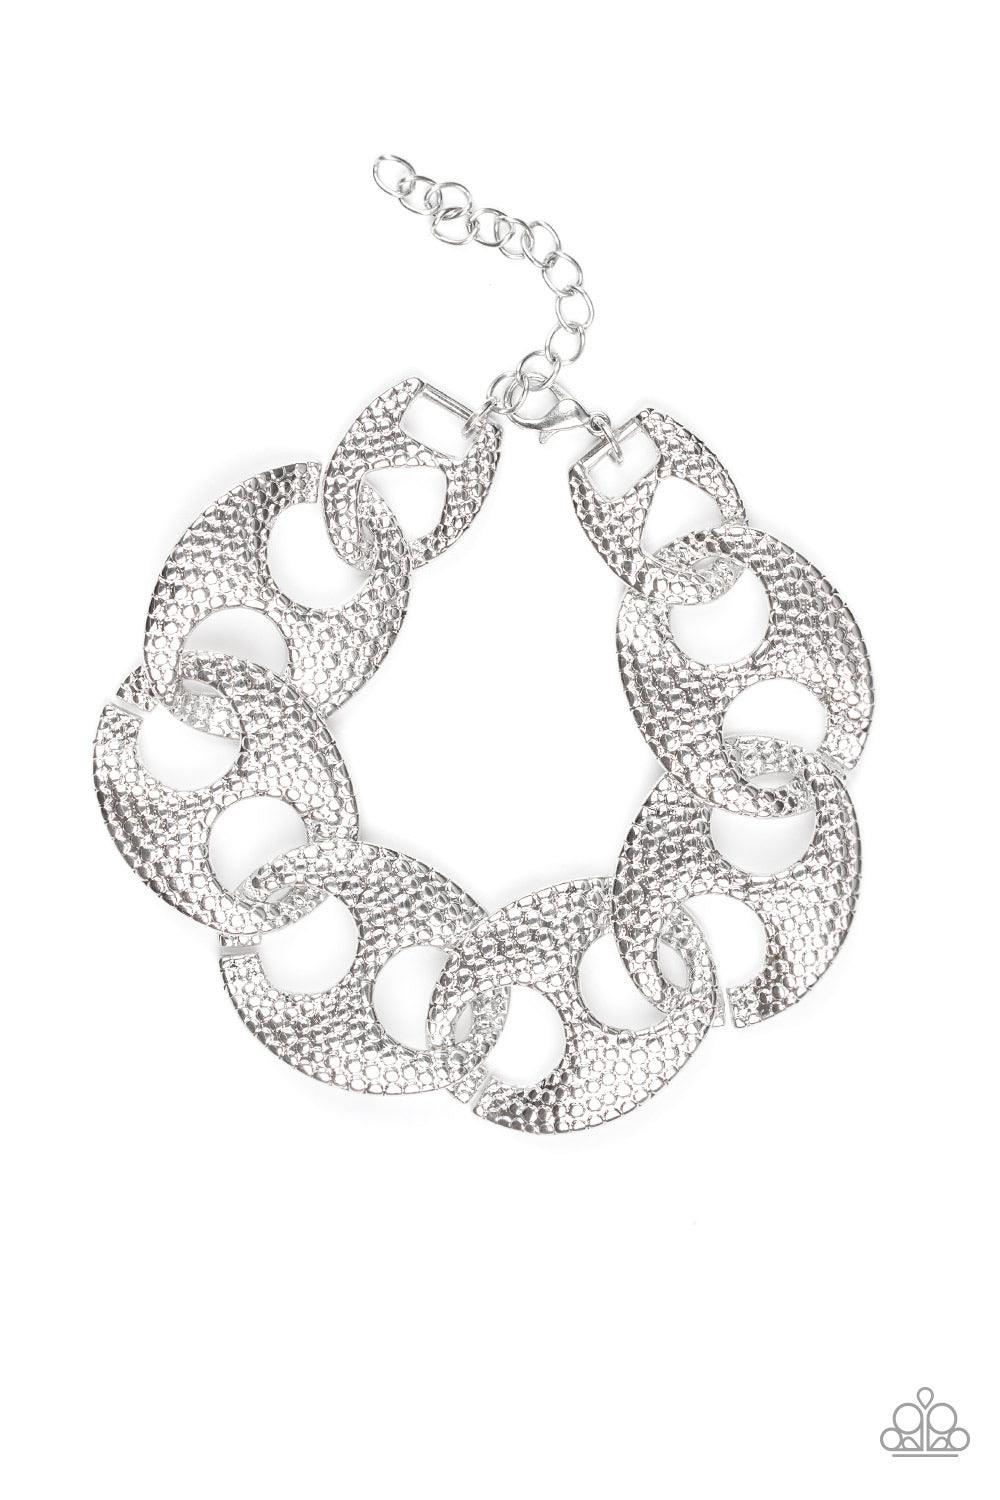 Paparazzi Accessories Casual Connoisseur - Silver Embossed in shimmery circular patterns, asymmetrical silver frames link across the wrist for a casually industrial look. Features an adjustable clasp closure. Jewelry